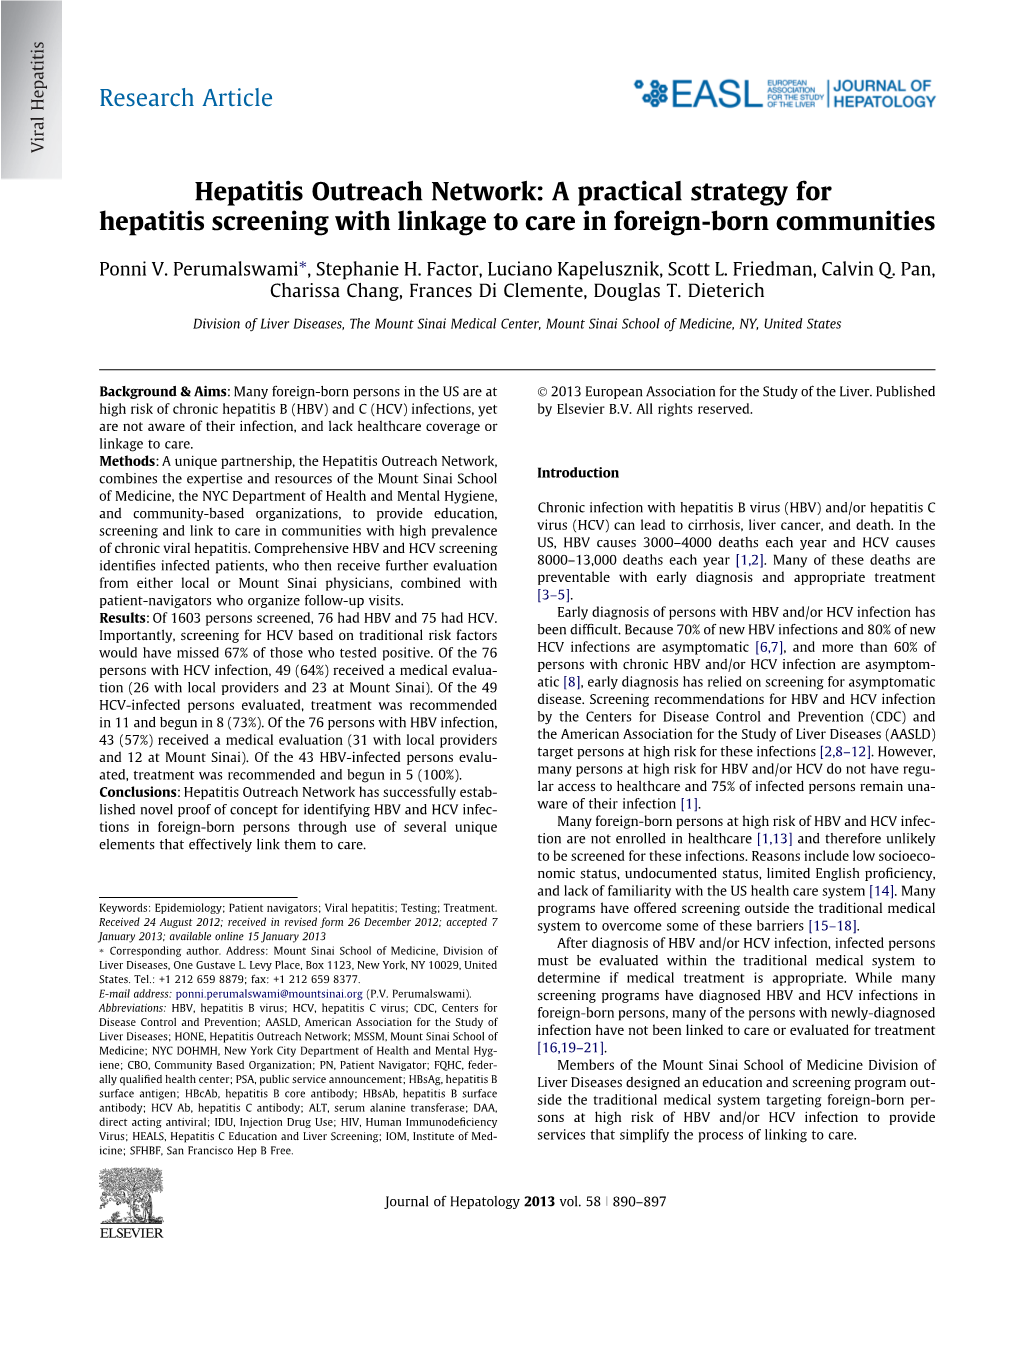 A Practical Strategy for Hepatitis Screening with Linkage to Care in Foreign-Born Communities